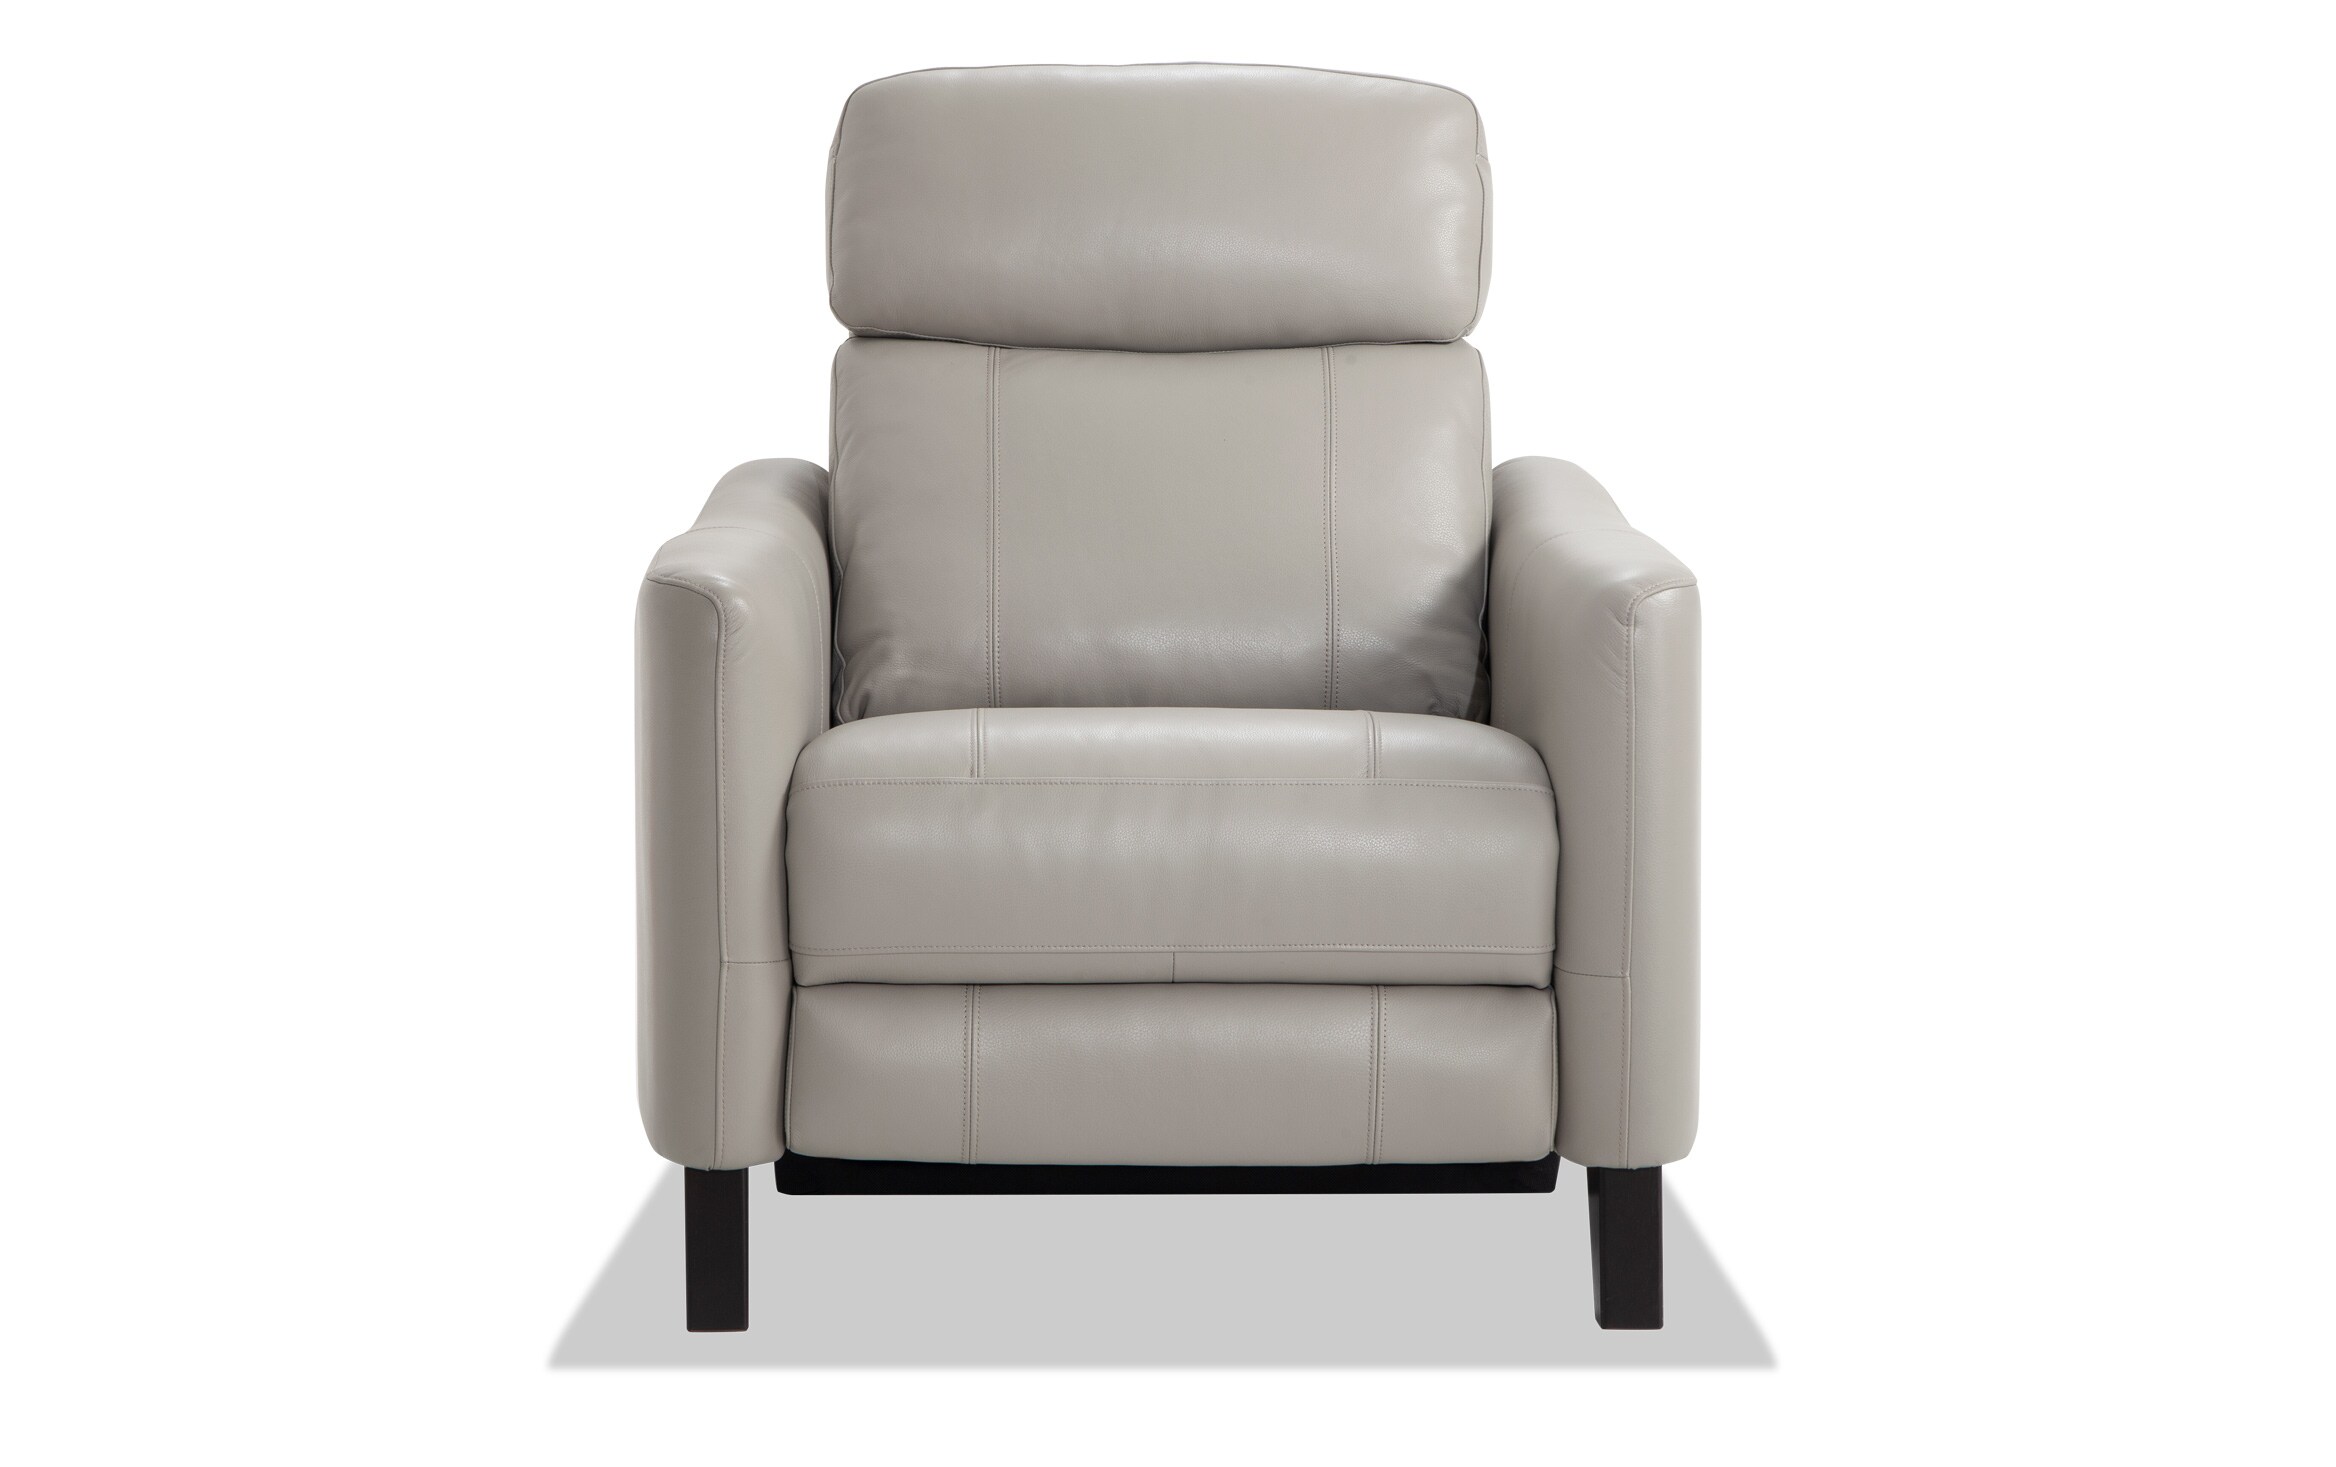 Symmetry Gray Leather Power Recliner, Power Recliners Leather